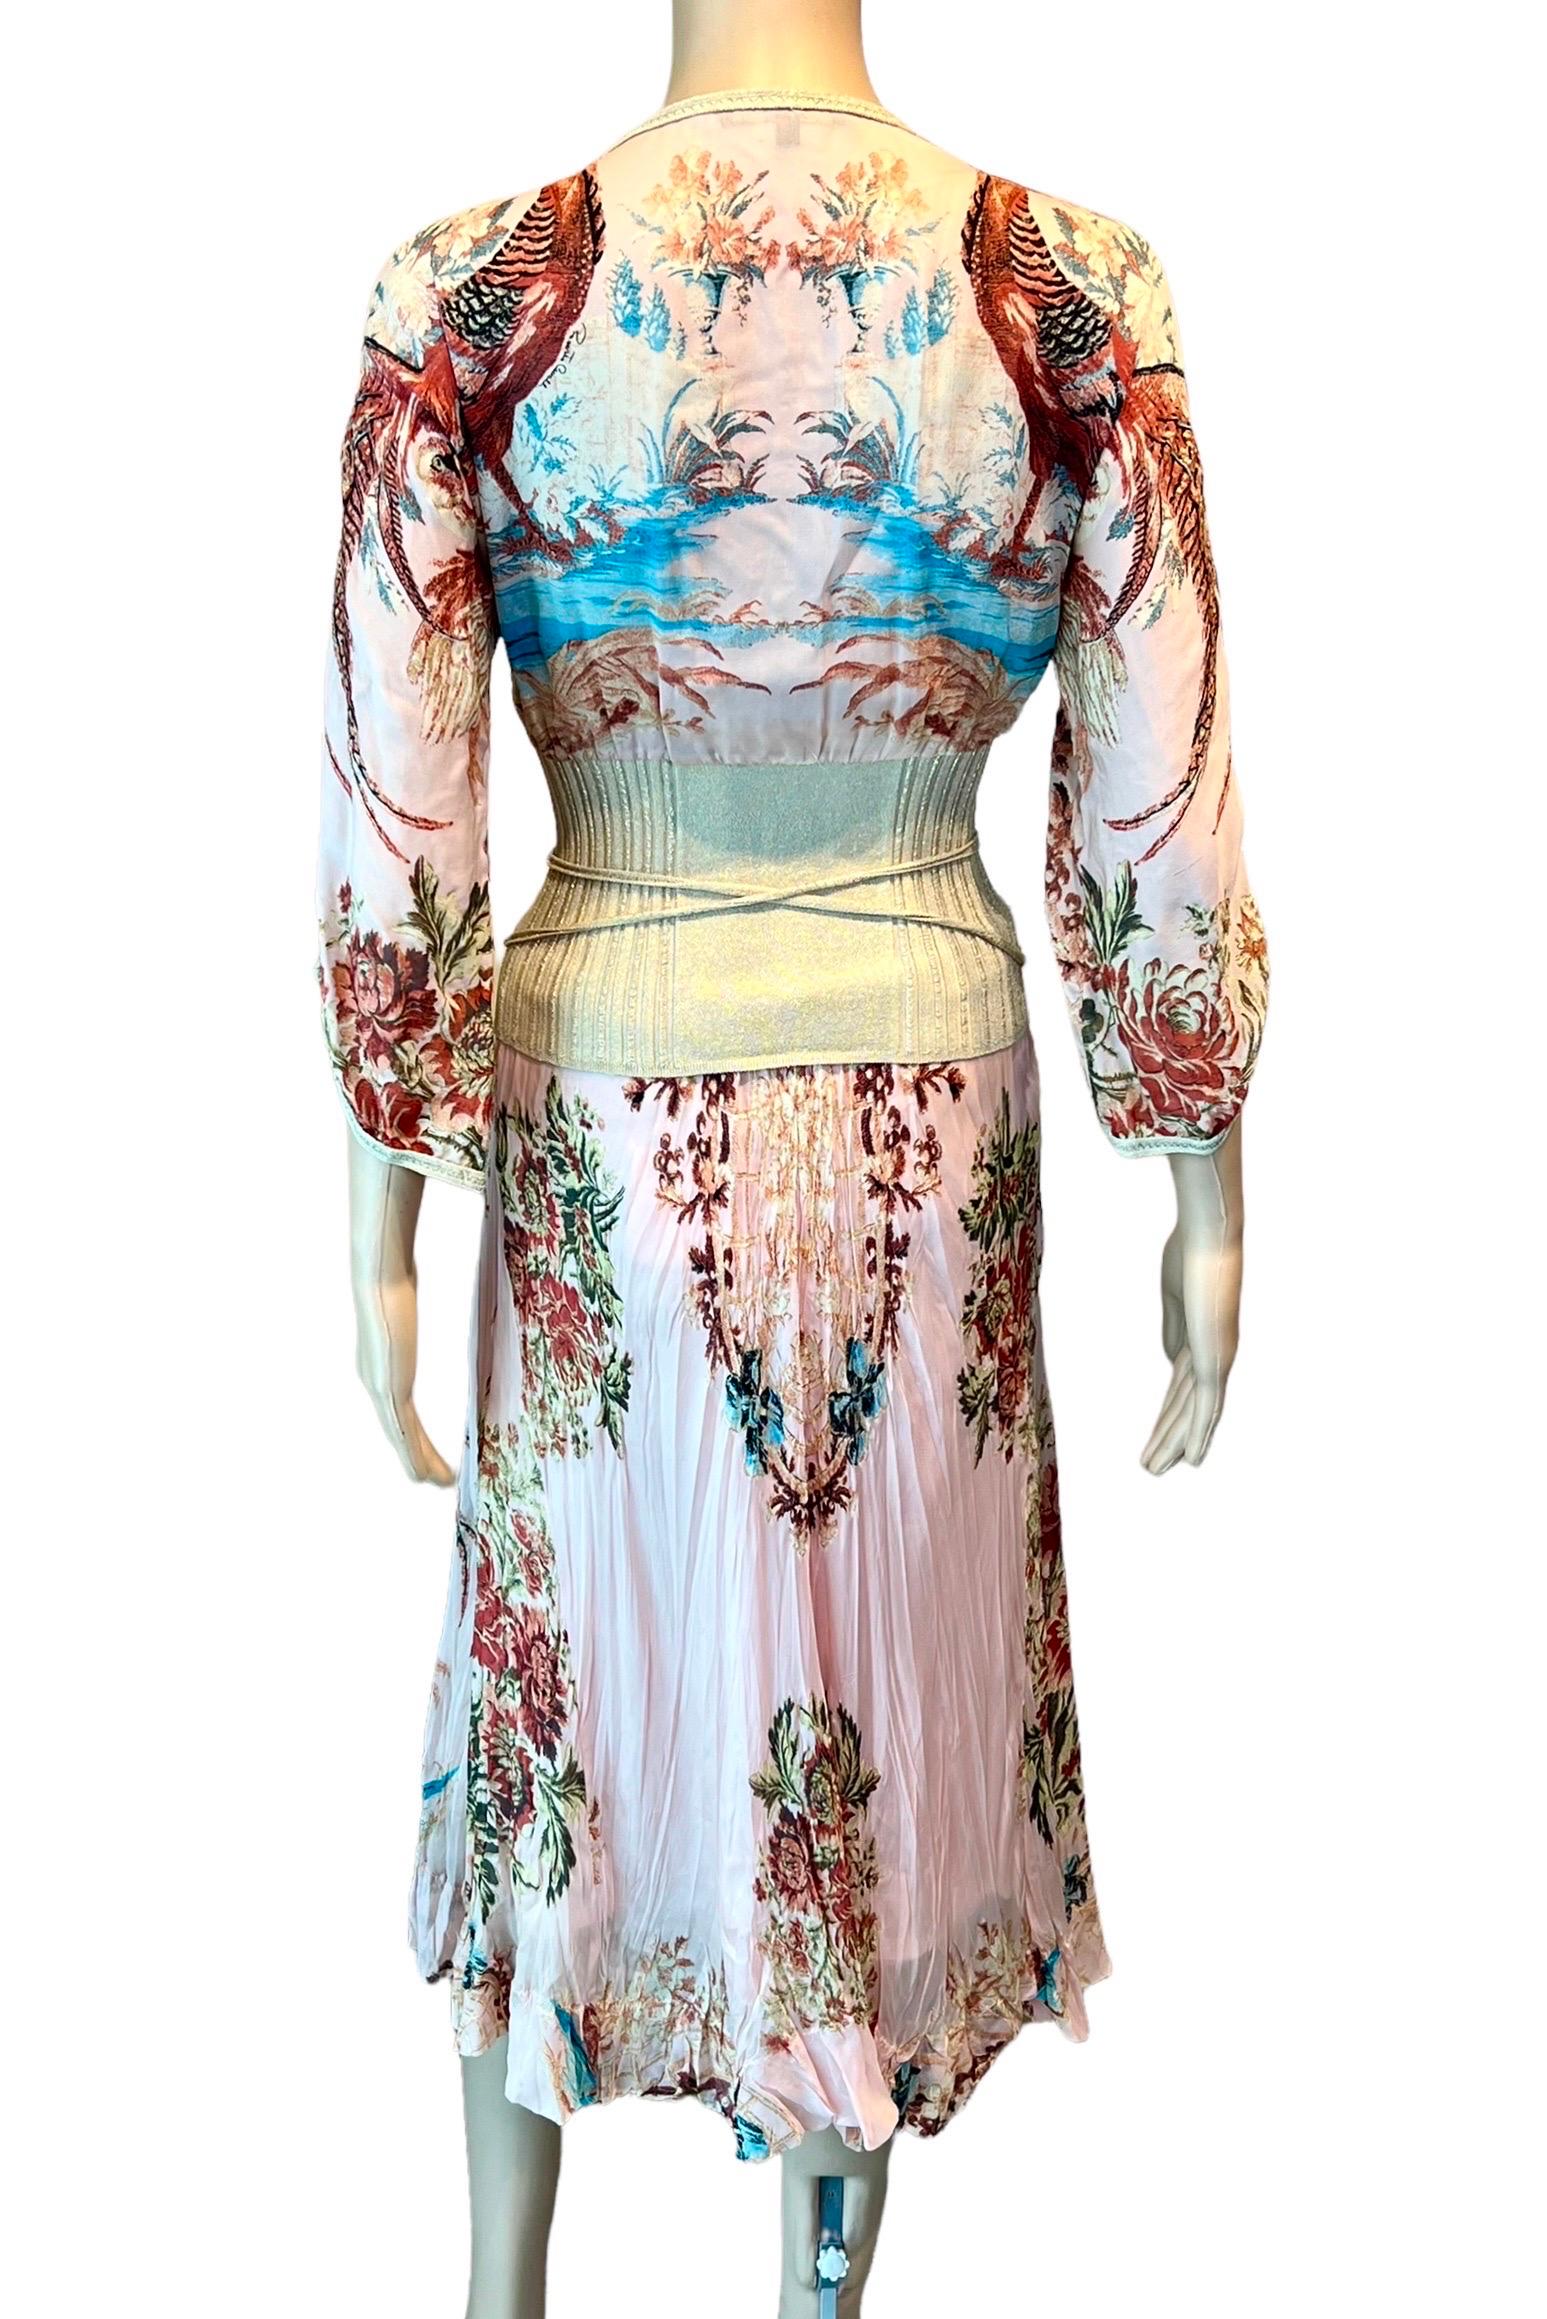 Roberto Cavalli S/S 2003 Chinoiserie Print Blouse Top and Midi Skirt 2 Piece Set In Good Condition For Sale In Naples, FL